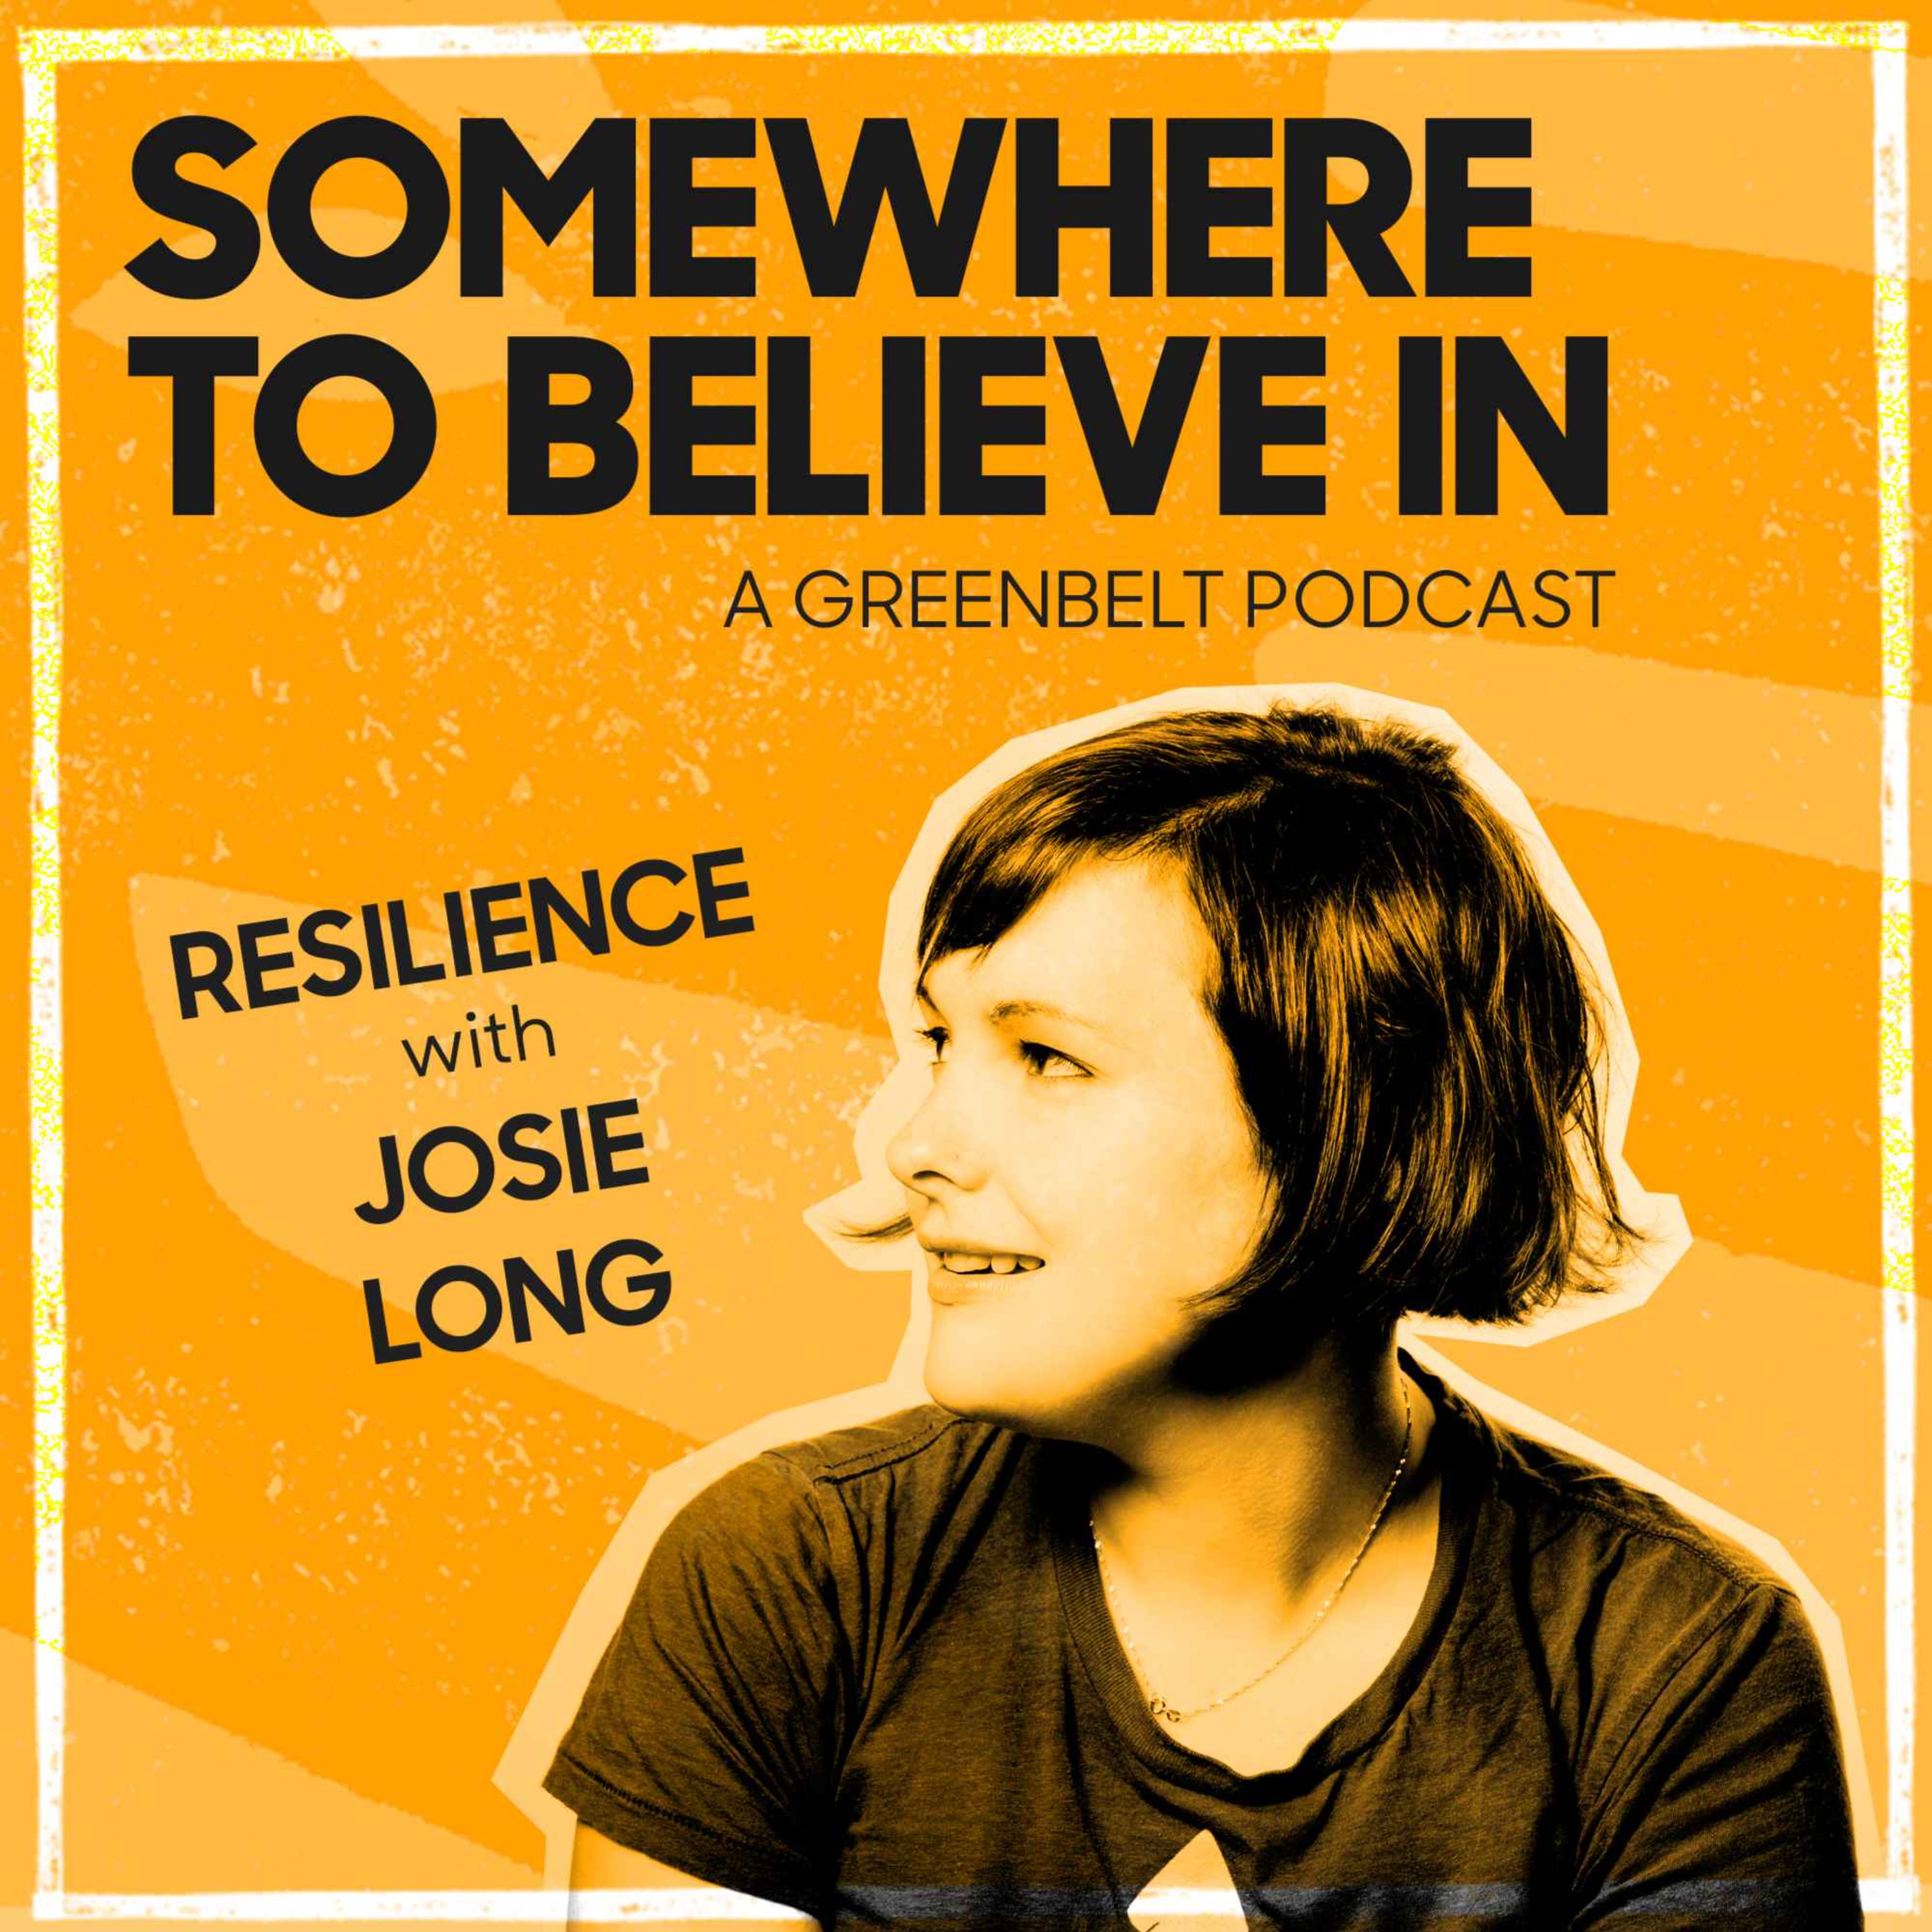 Resilience with Josie Long